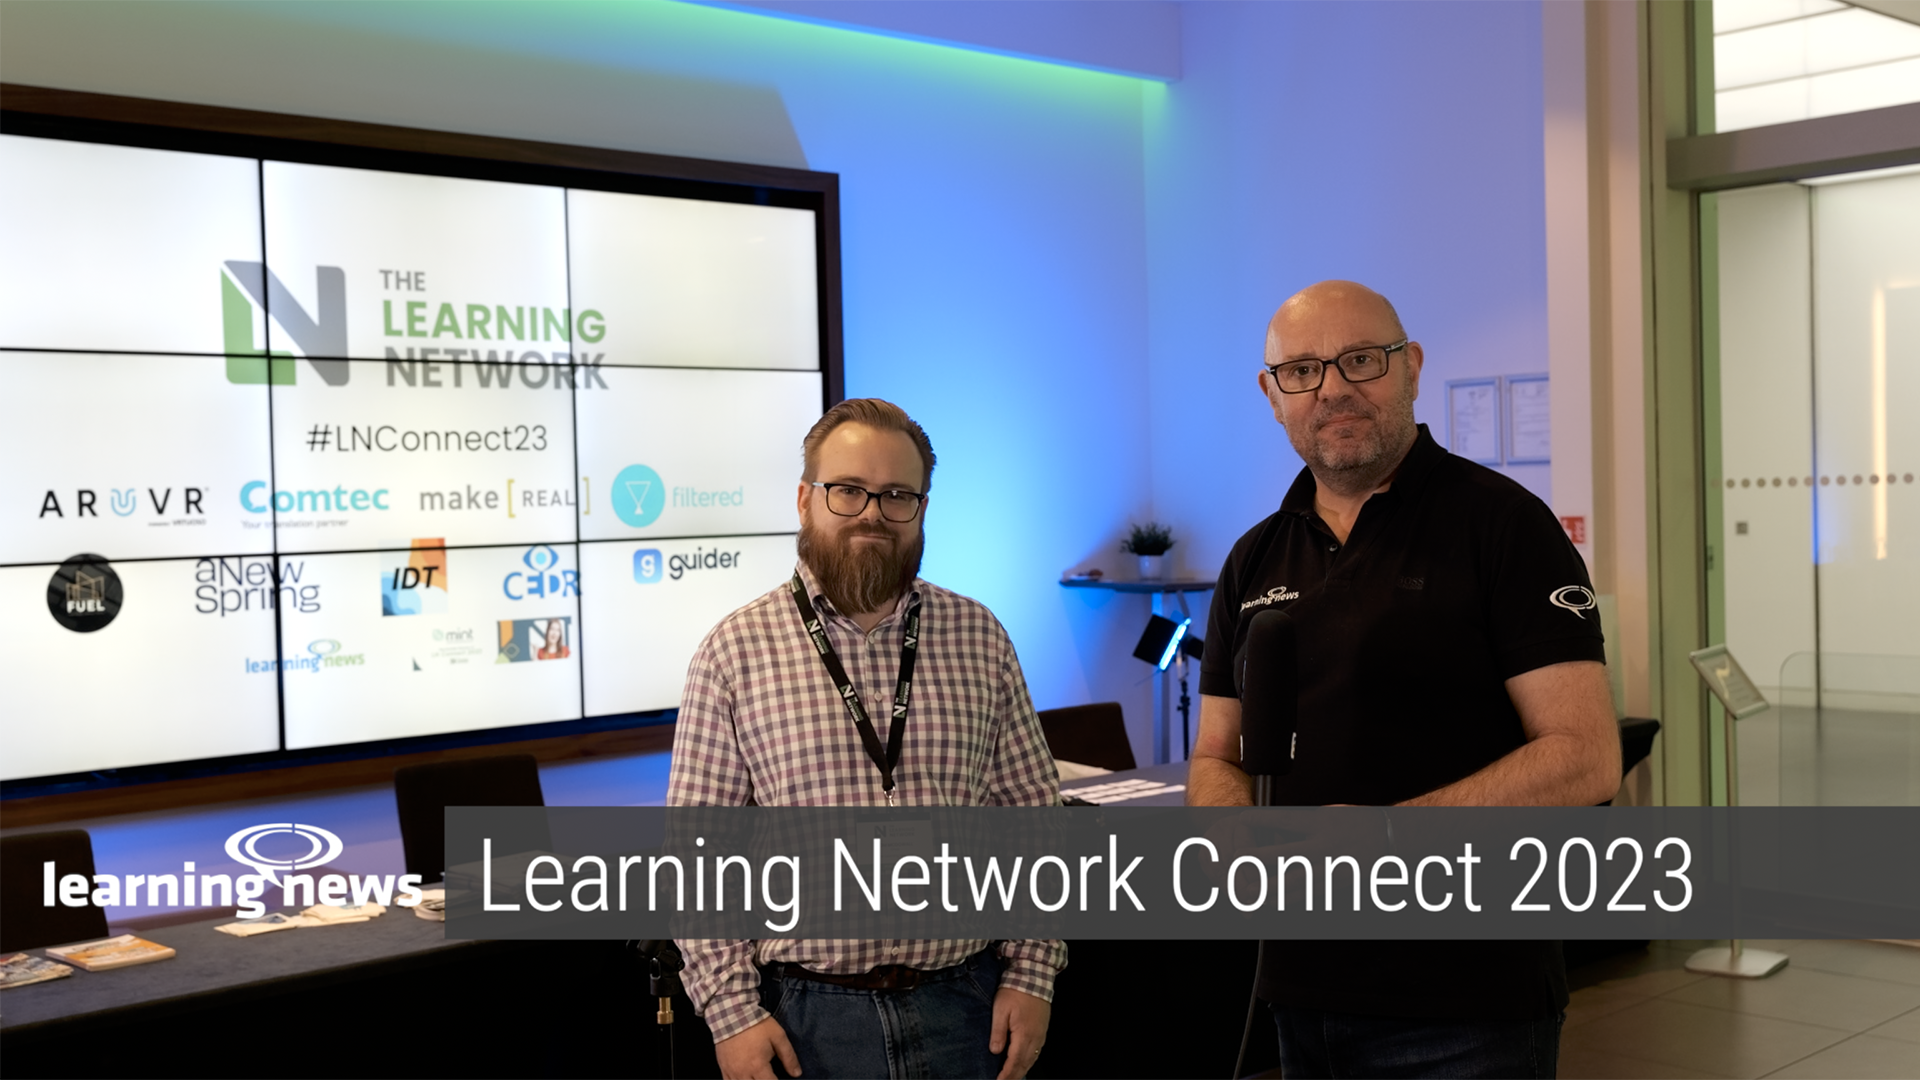 Tom McDowall, Chair of The Learning Network, with Rob Clarke, Learning News, at Connect 2023